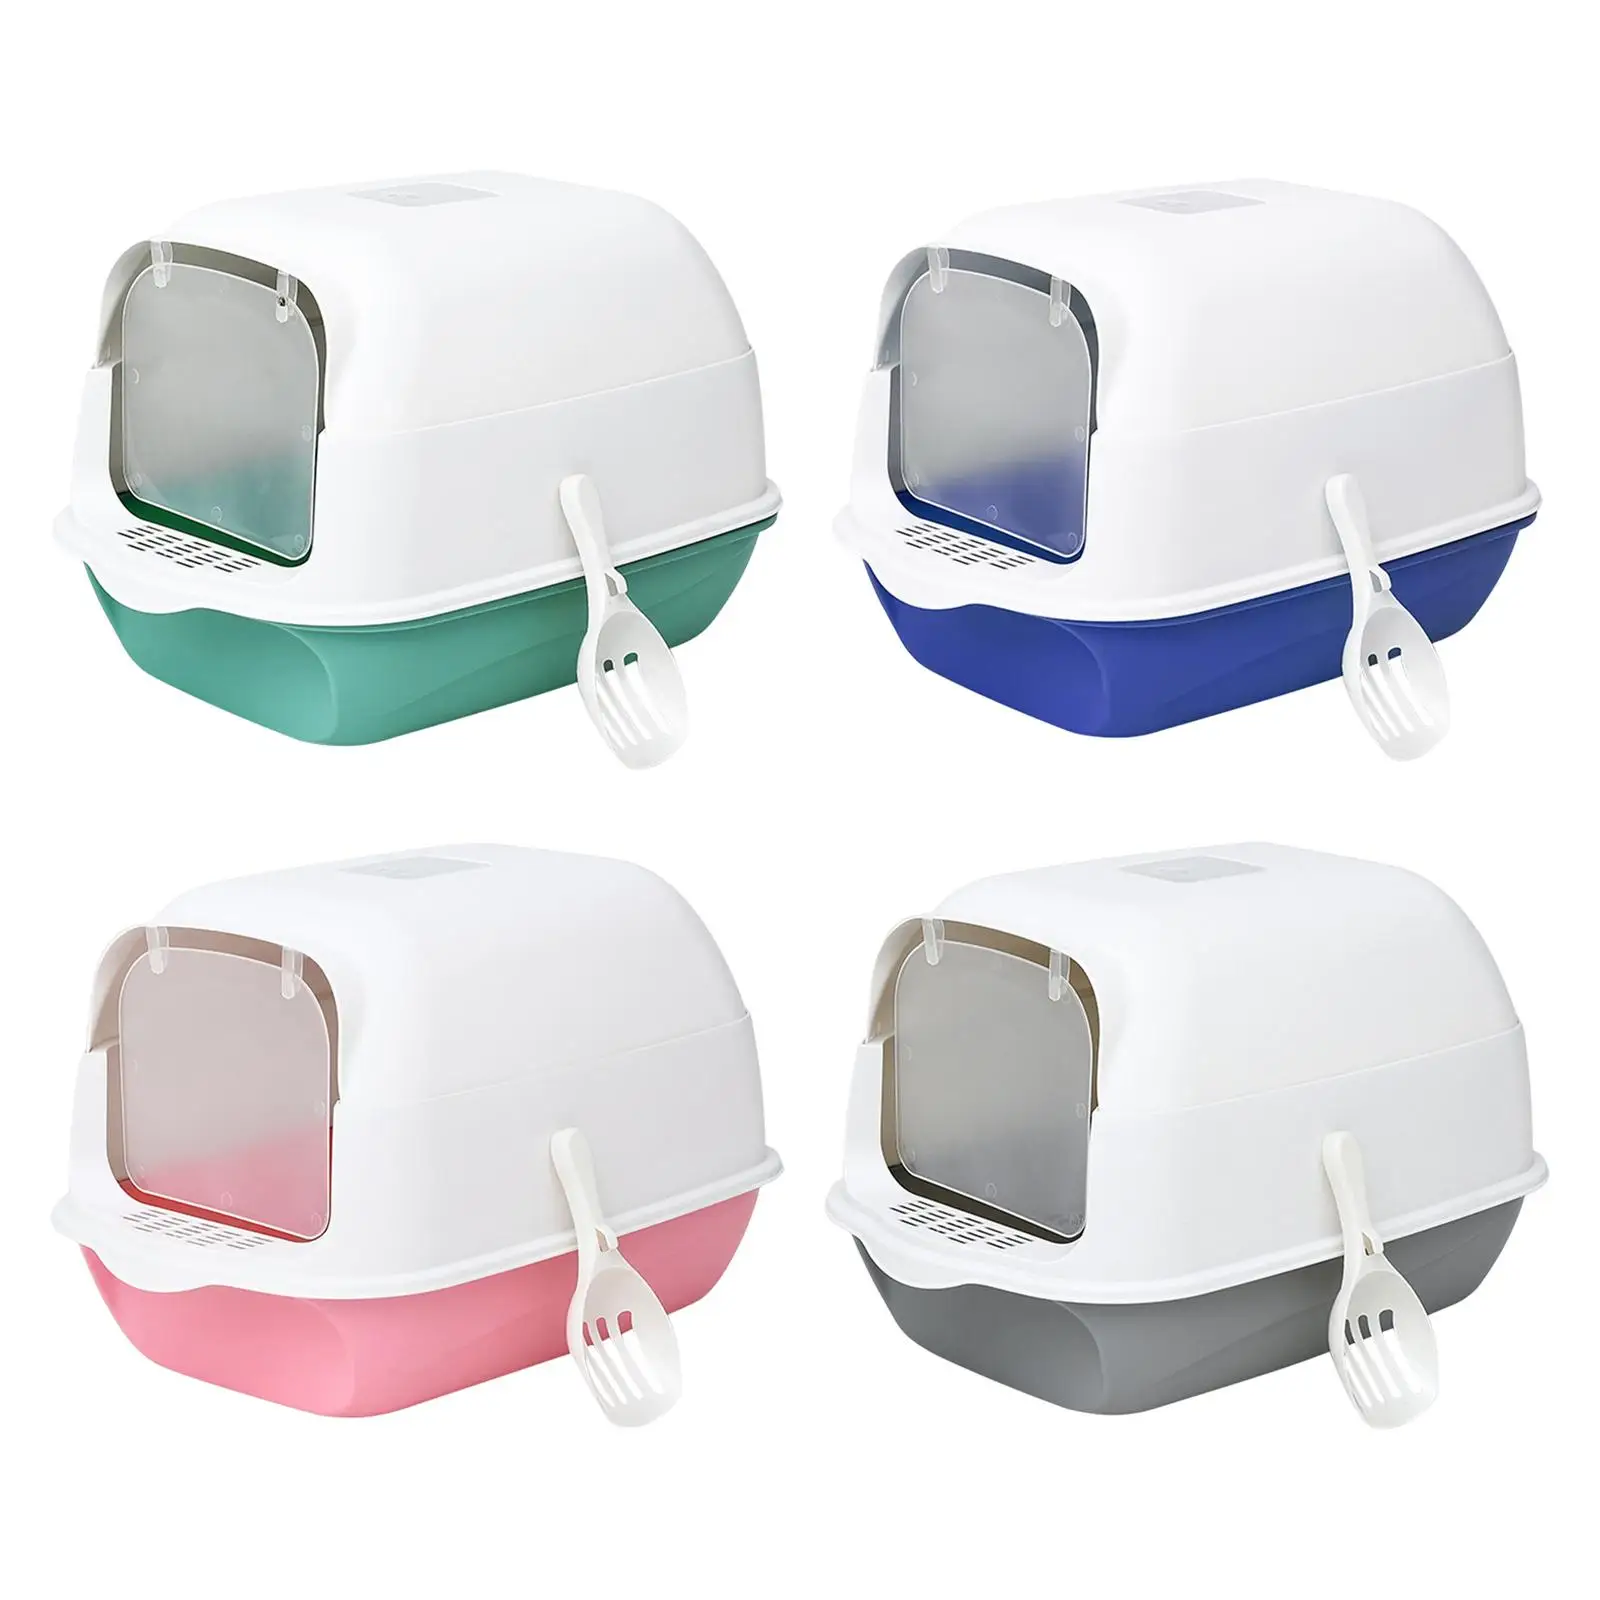 Cat Litter Box Fully Enclosed Kitten House Cat Potty Size 50x35x34cm Large space Supplies Anti Splash Durable with Scoop